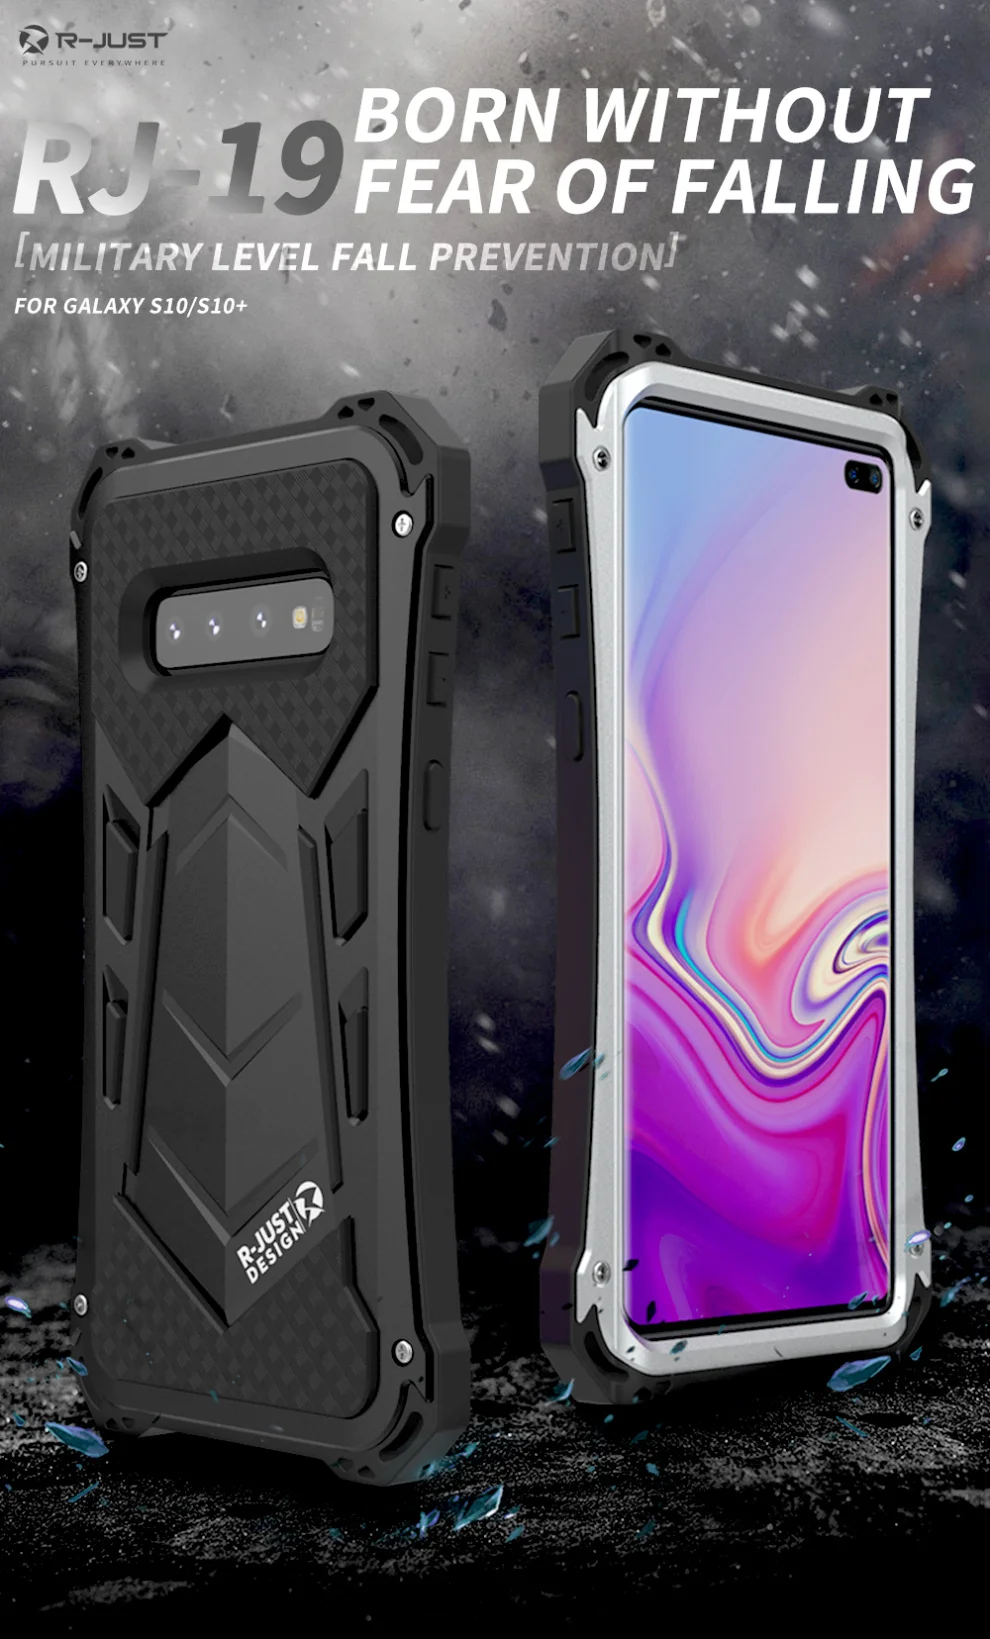 R-JUST Shockproof Aluminum Simon waterproof Metal Case For Samsung S10 Note 9 10 